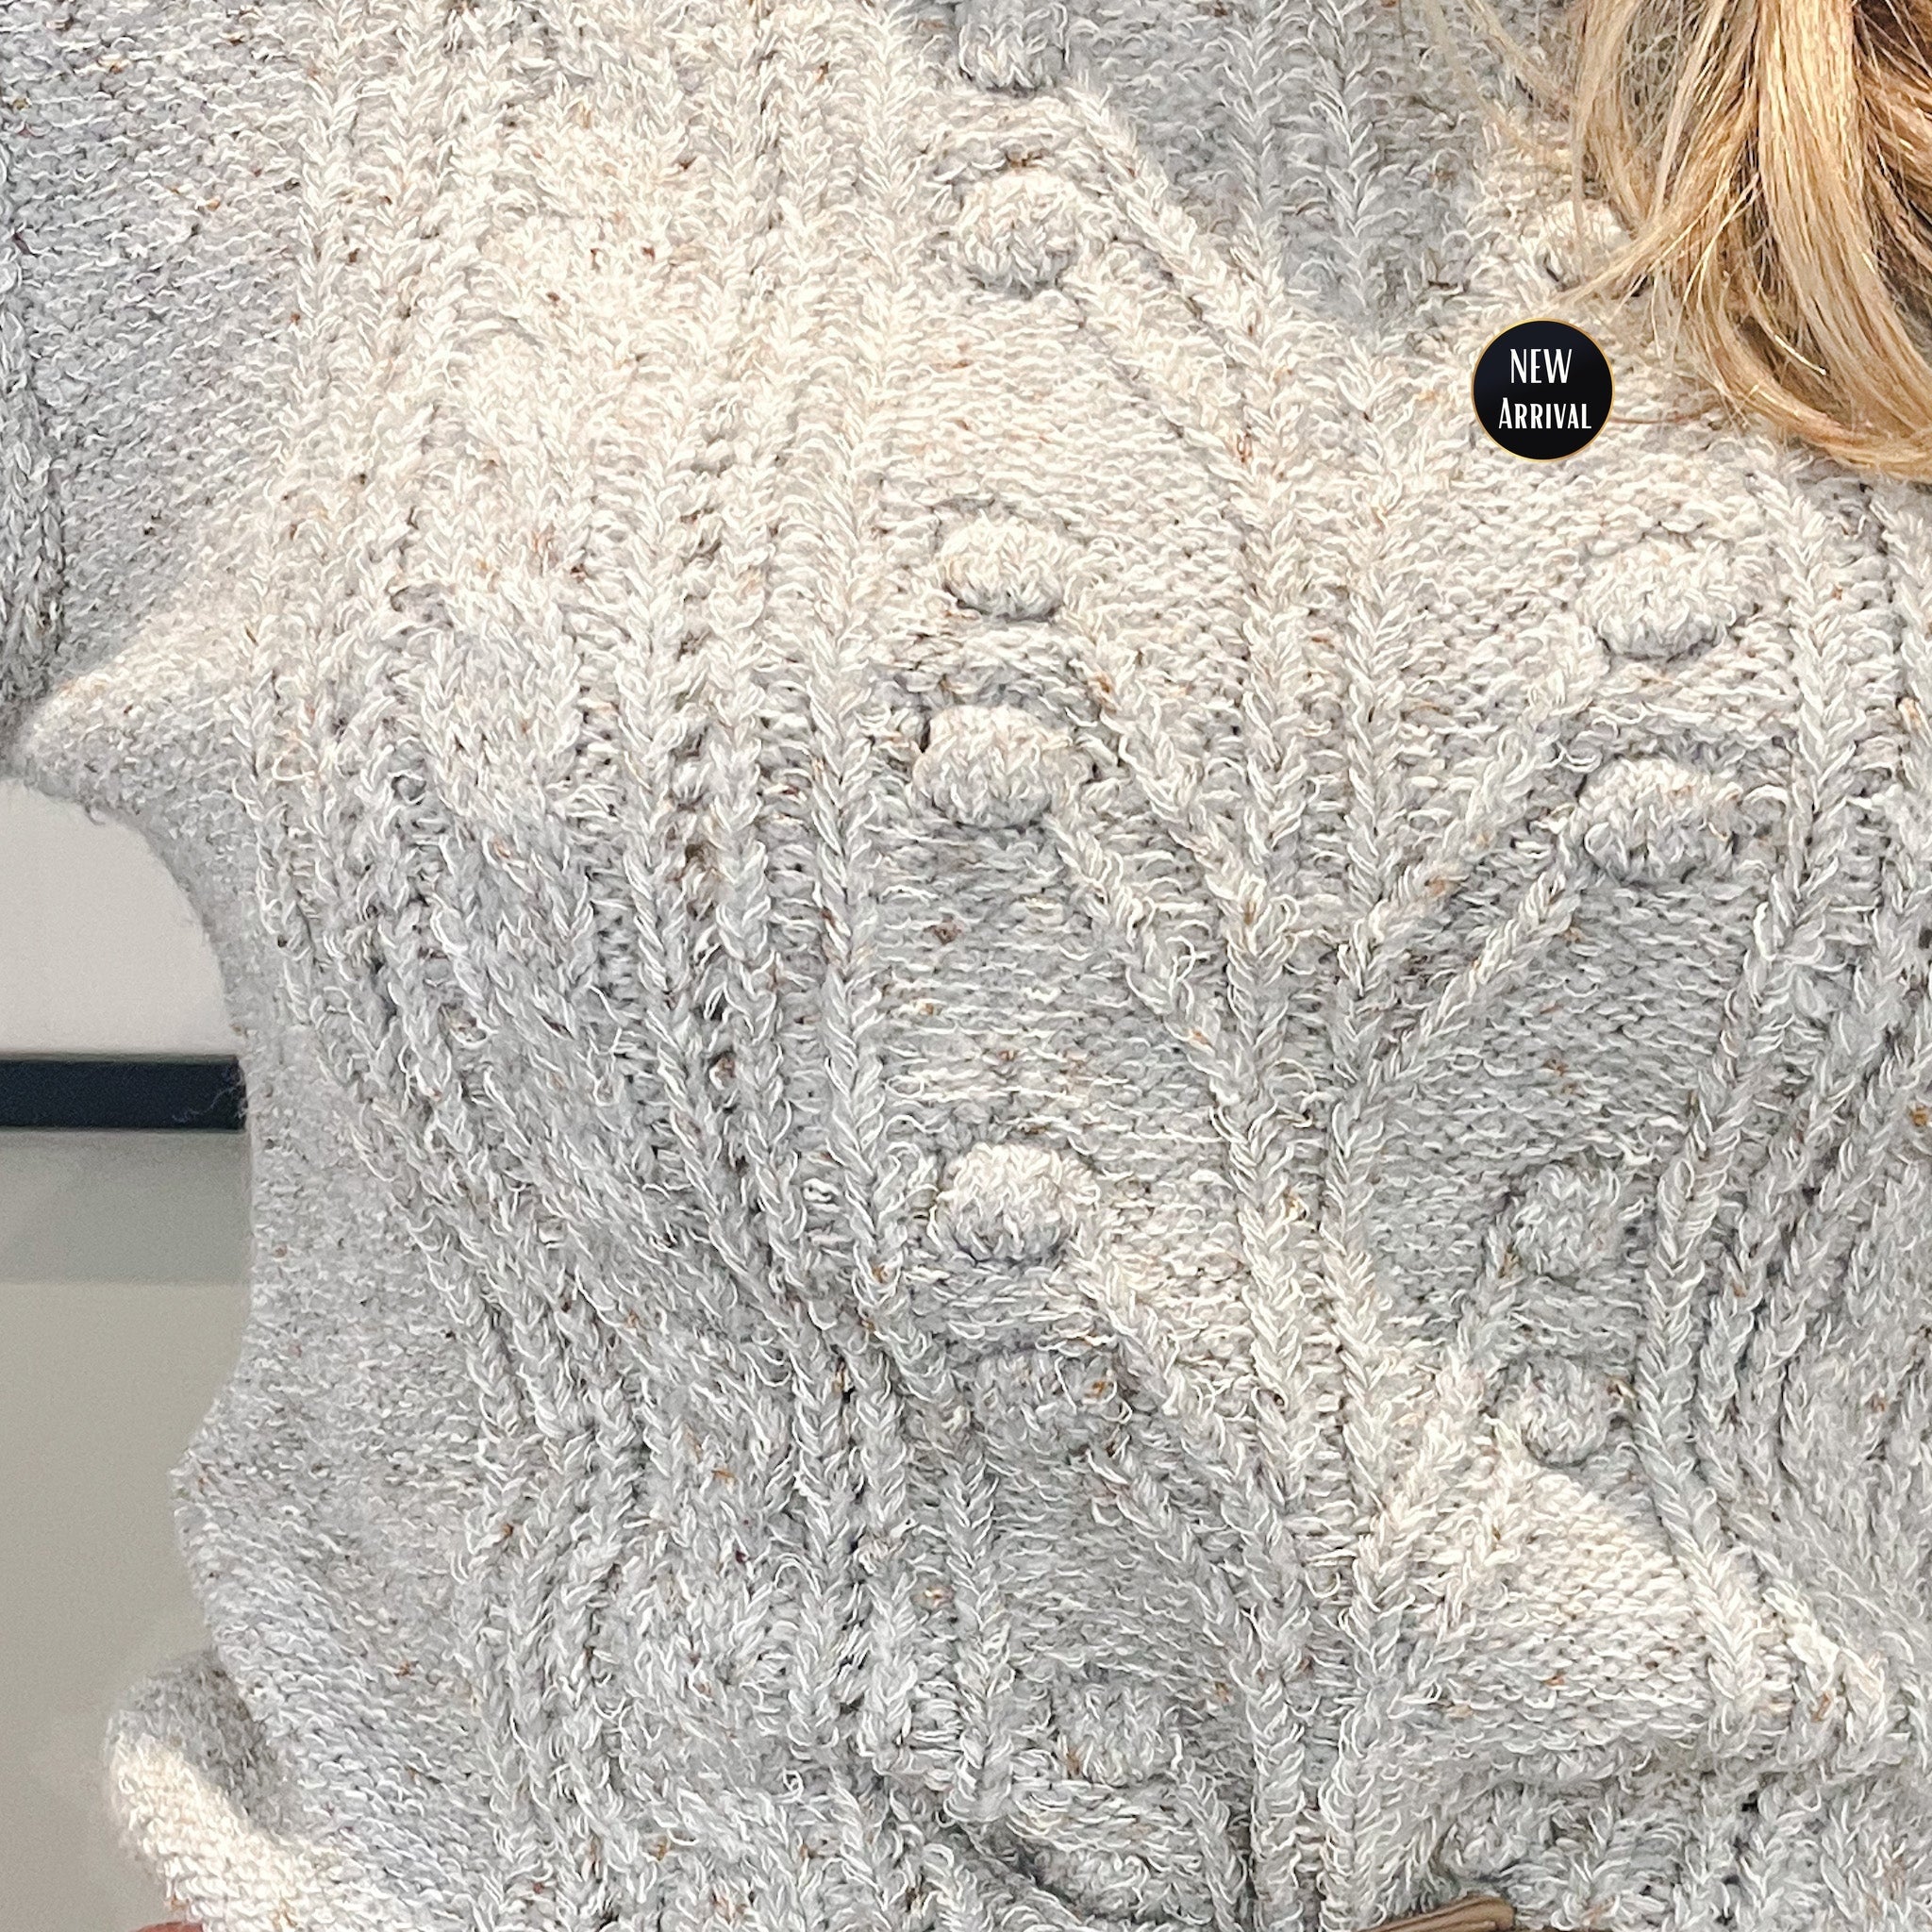 Chicago Stores Cable Knit Sweater-Shabby 2 Chic Boutiques